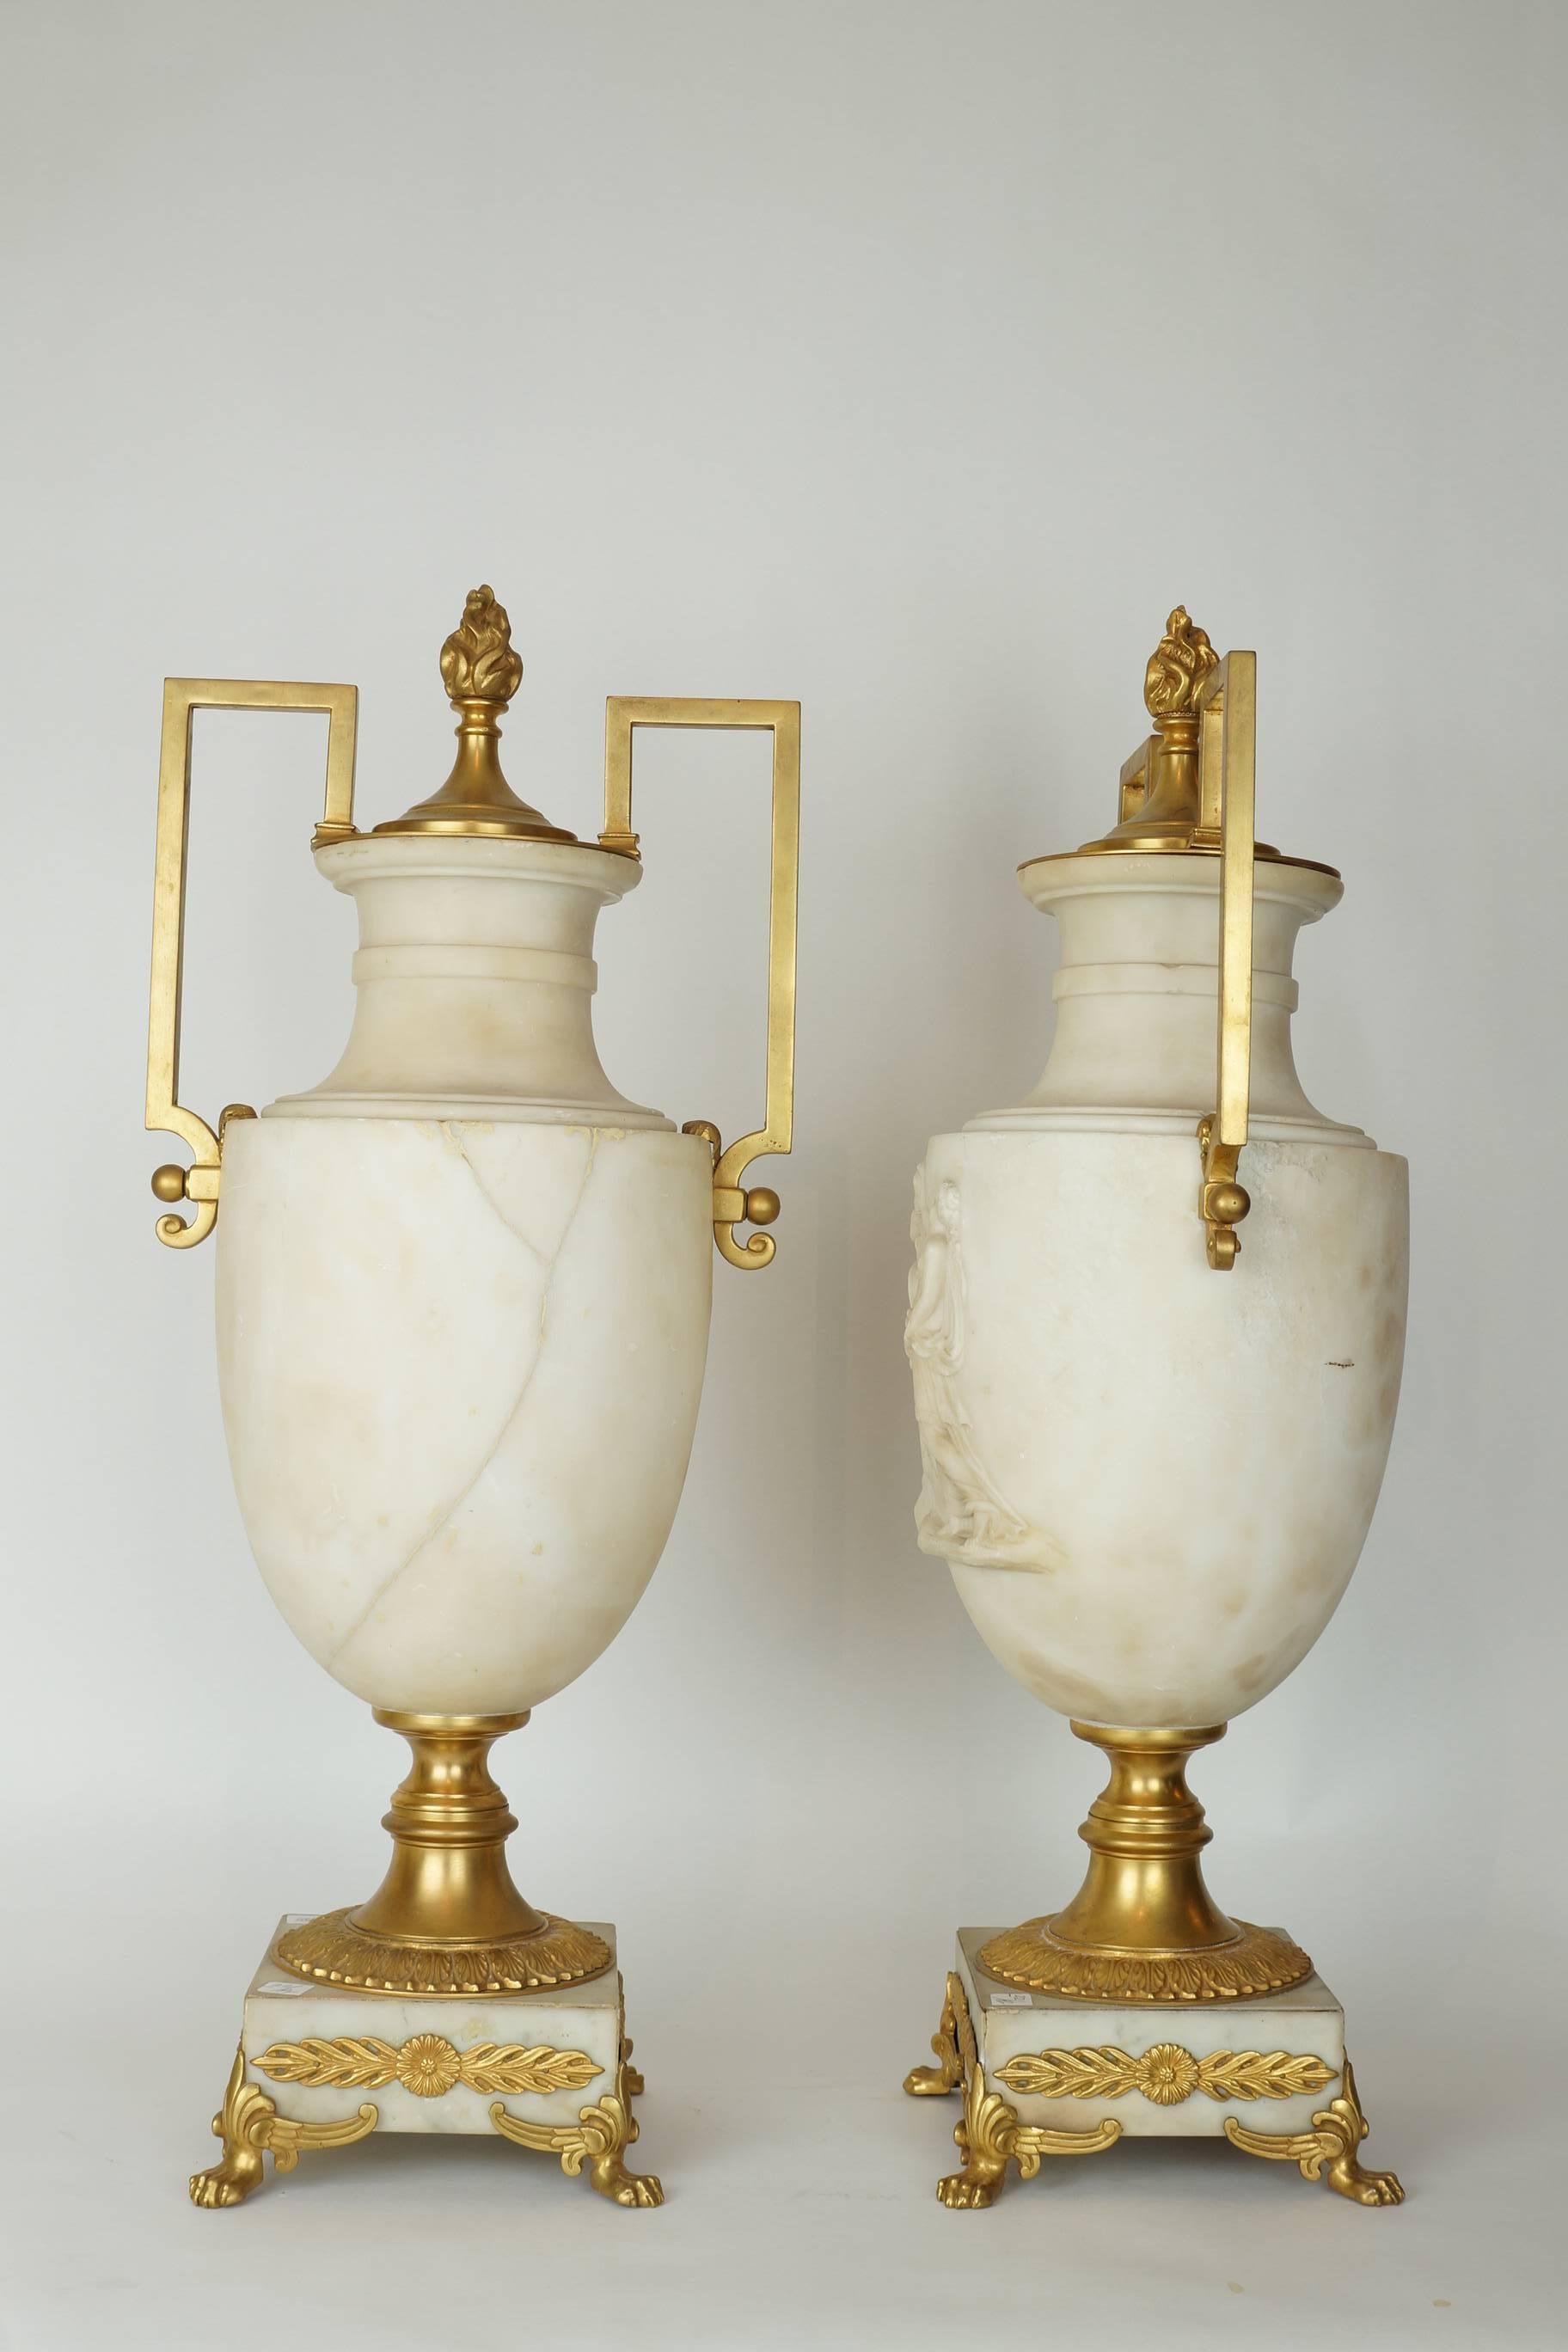 Pair of Italian Alabaster and bronze neoclassical urn lamps with raised neoclassical scenes and bronze handles.
